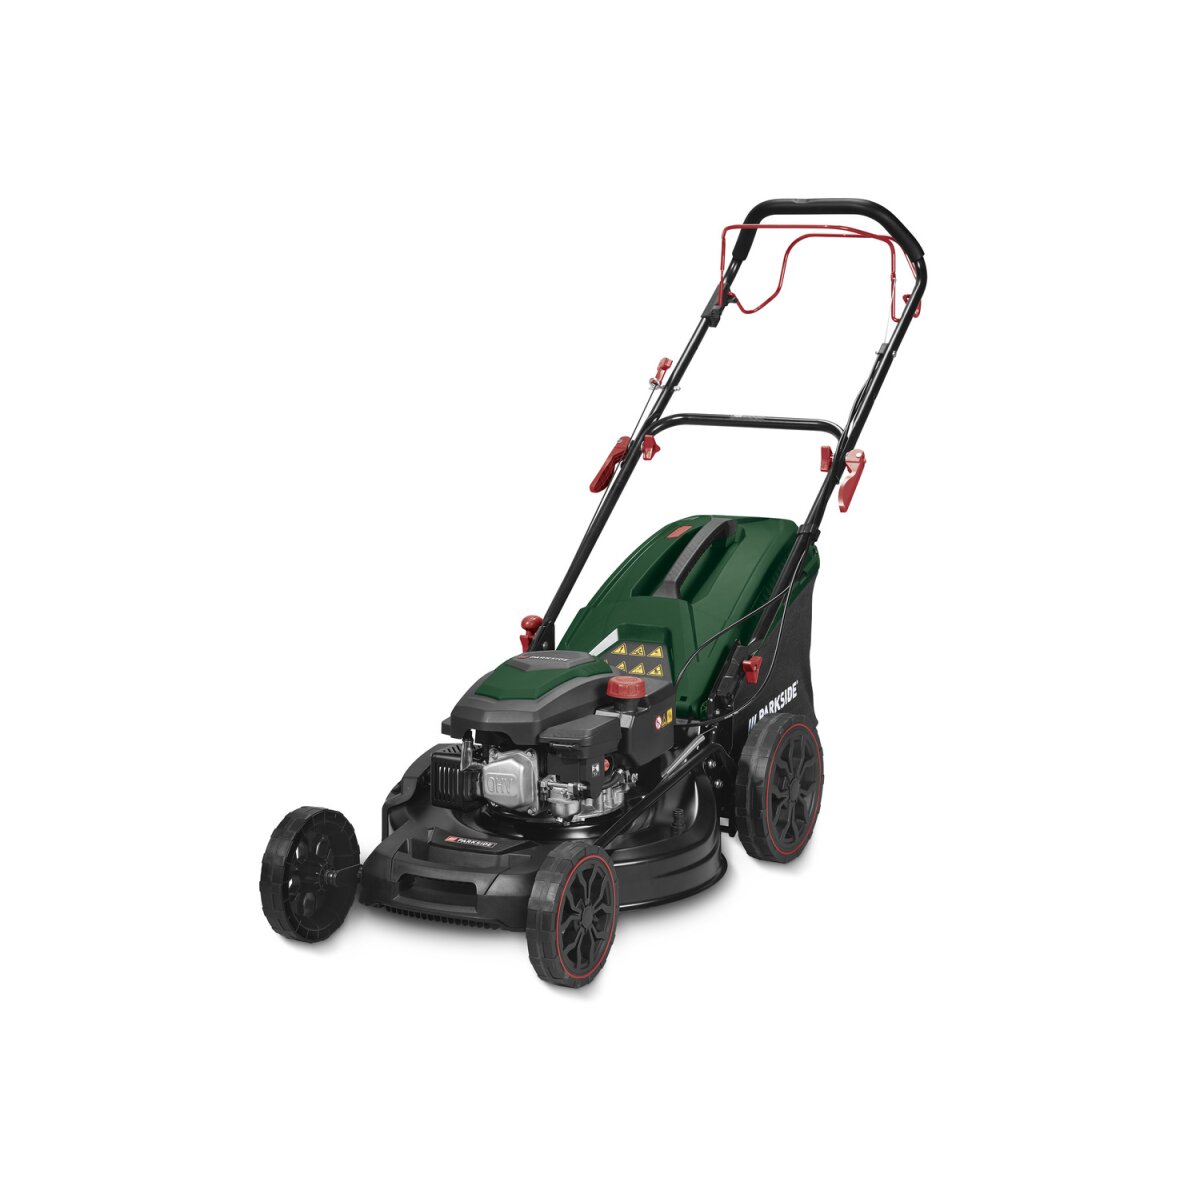 PARKSIDE® Benzin-Rasenmäher »PBRM 51 A1«, 3,0 kW, 4,1 PS - B-Ware sehr gut,  327,99 €